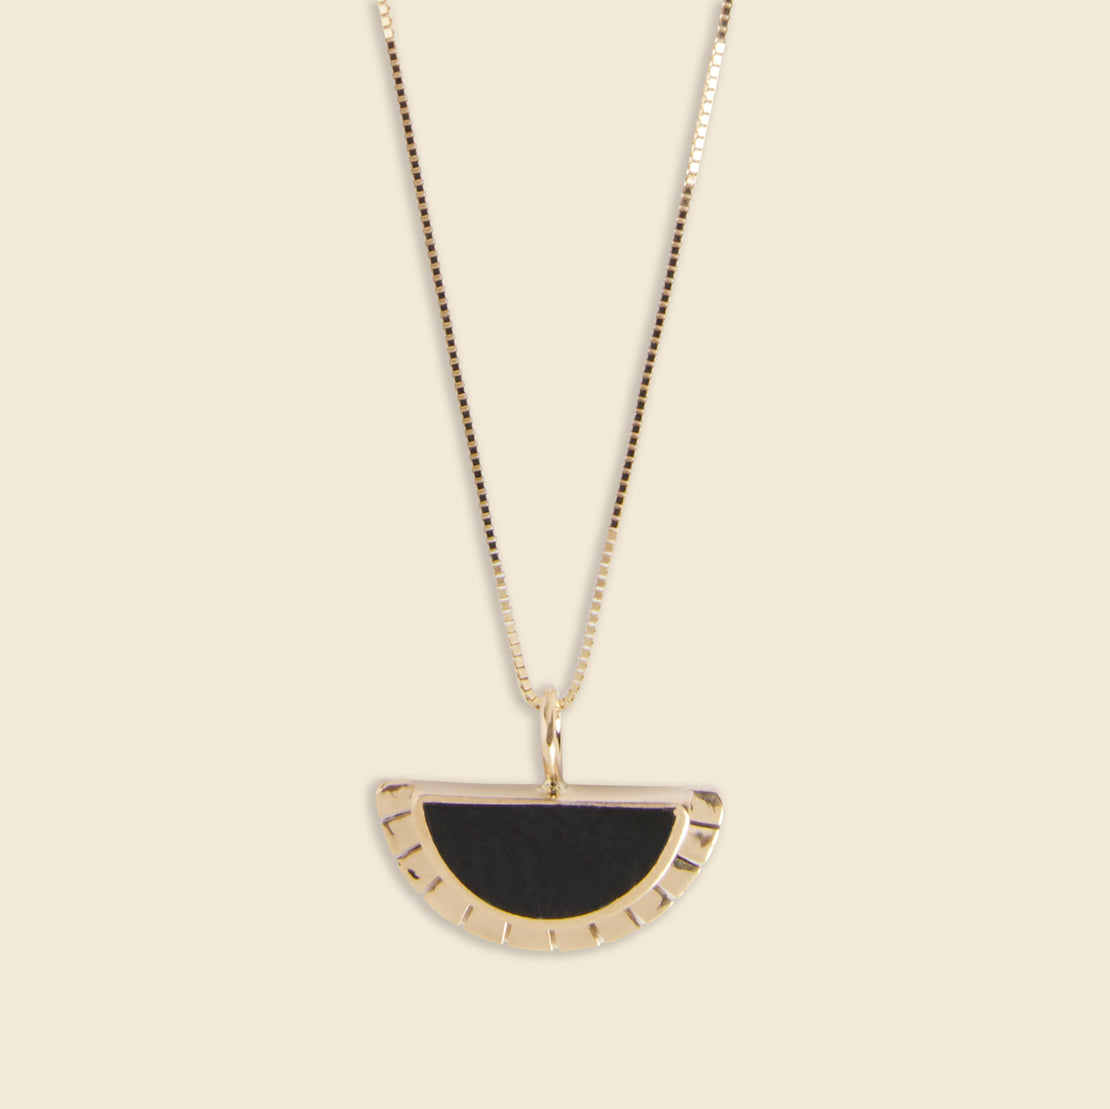 Young in the Mountains Selene Necklace - Black Jade